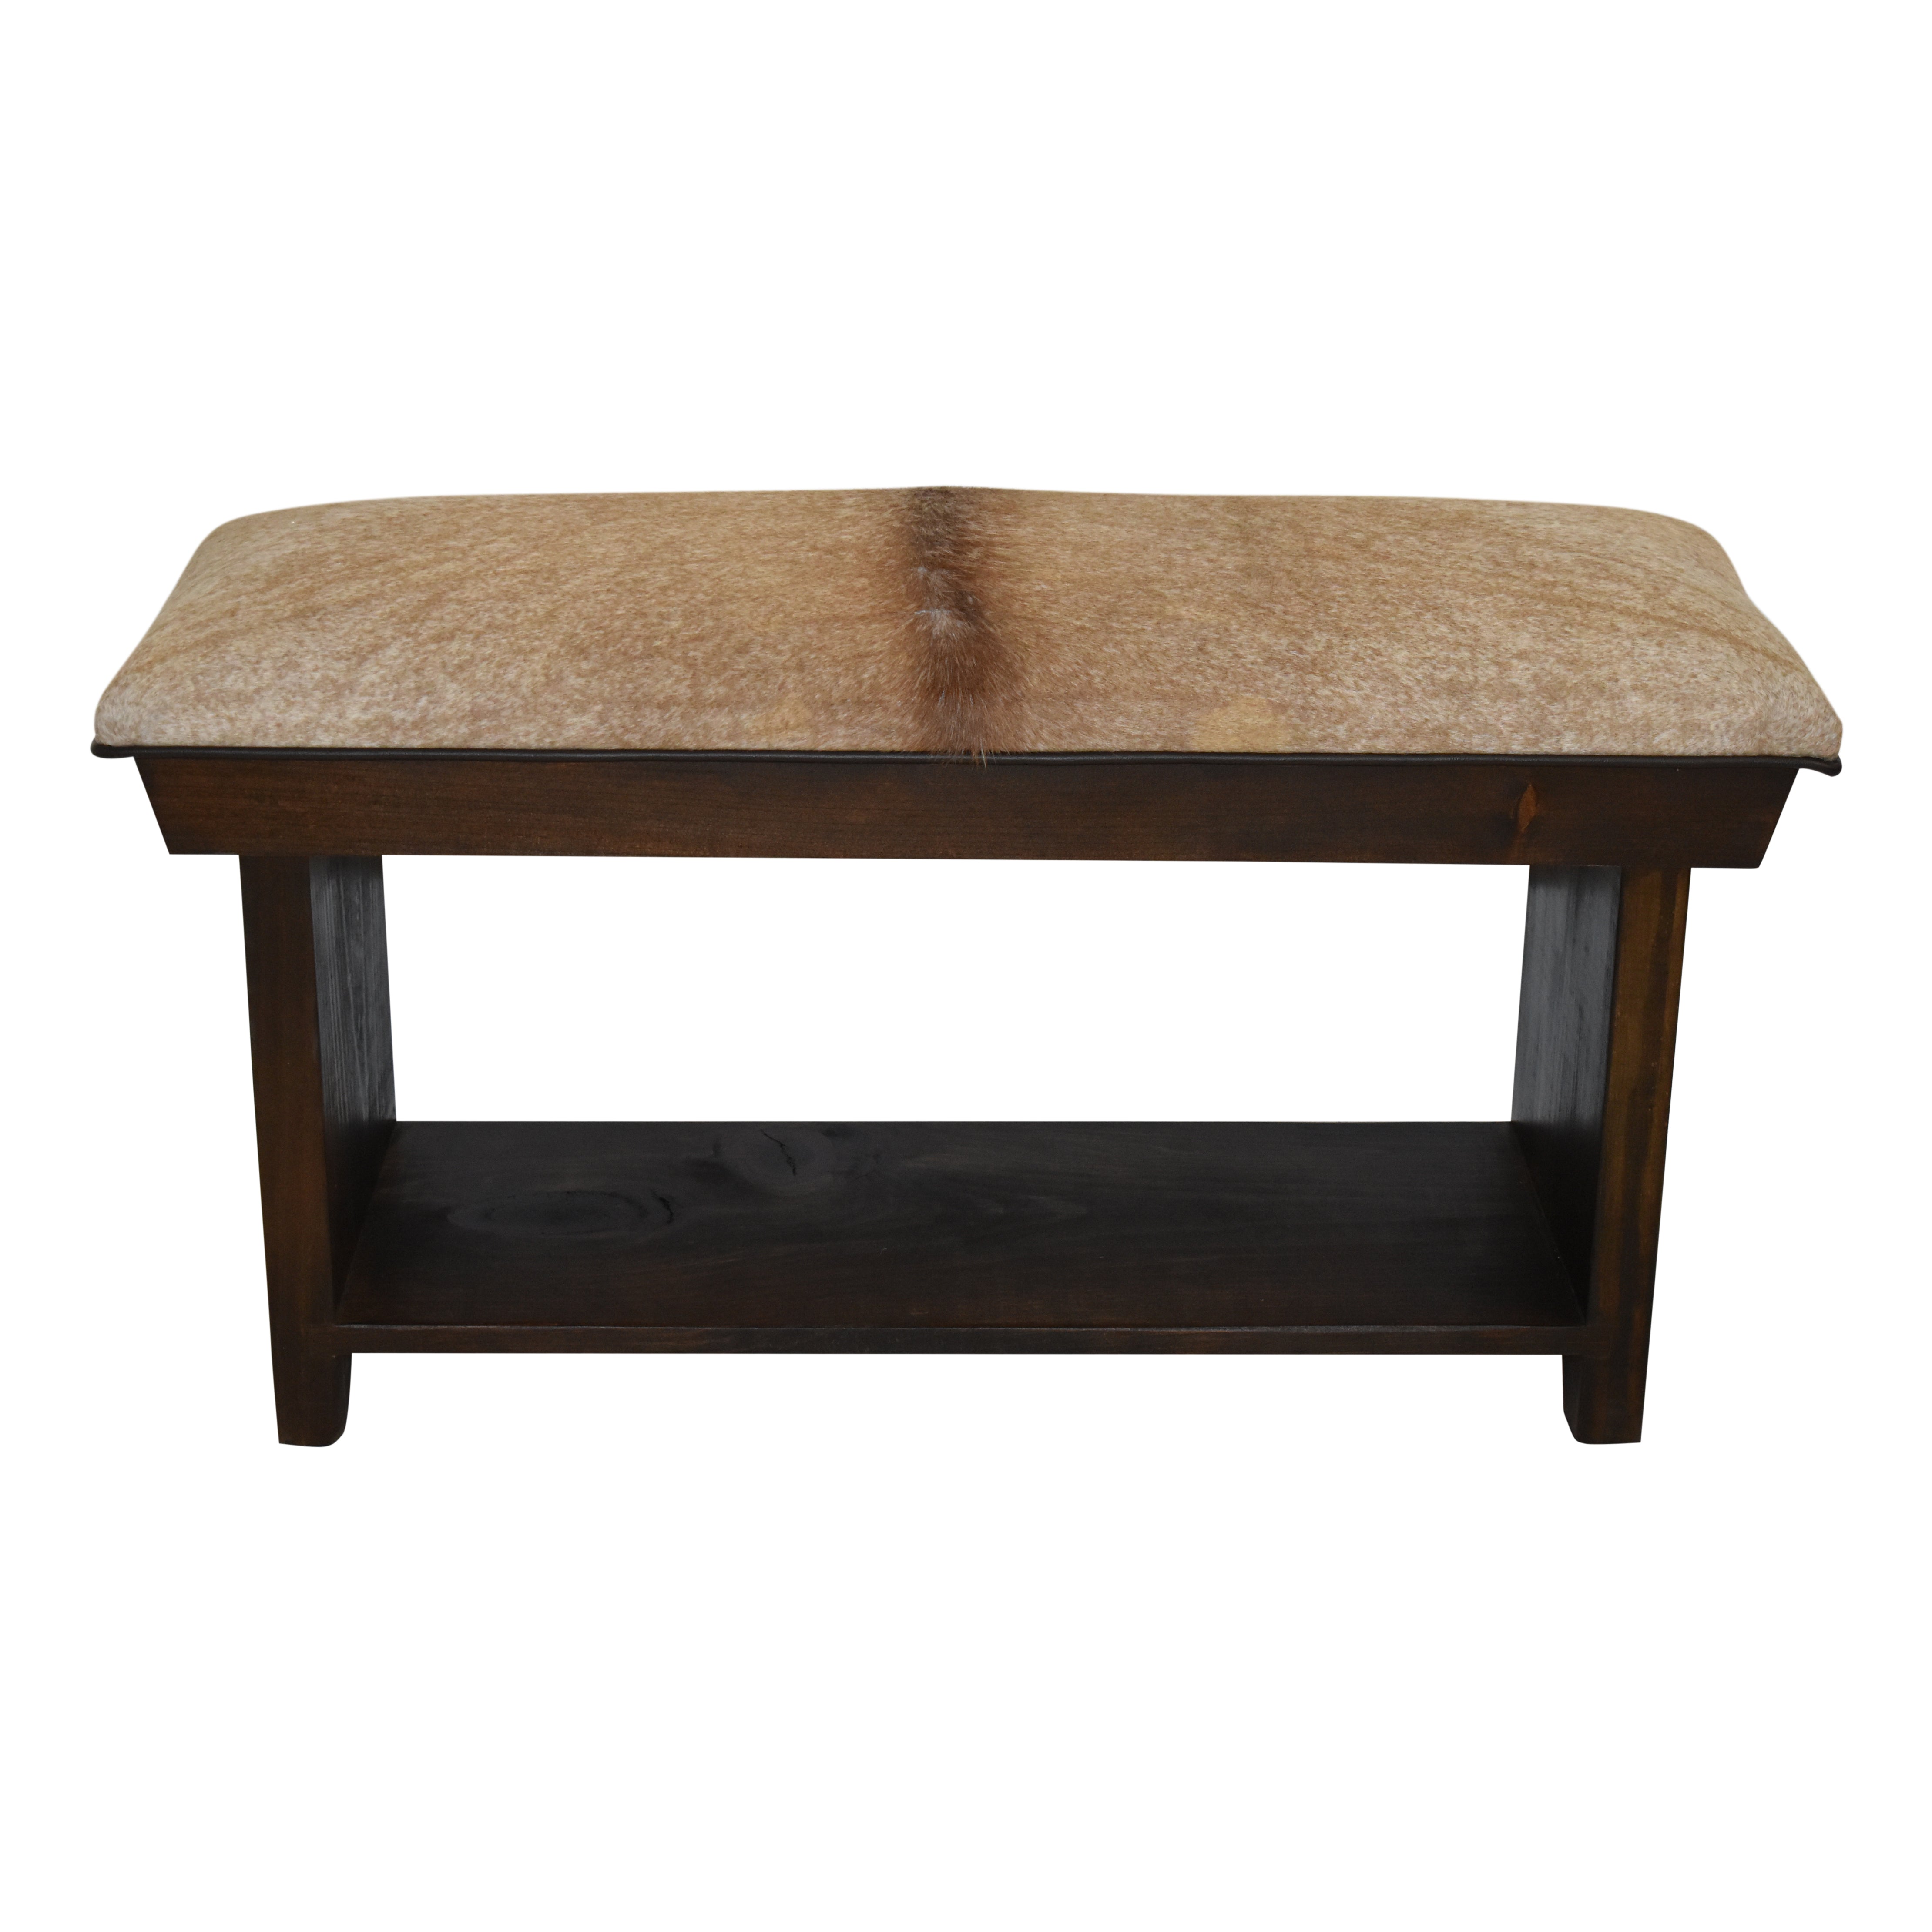 Cowhide Bench with Lower Shelf